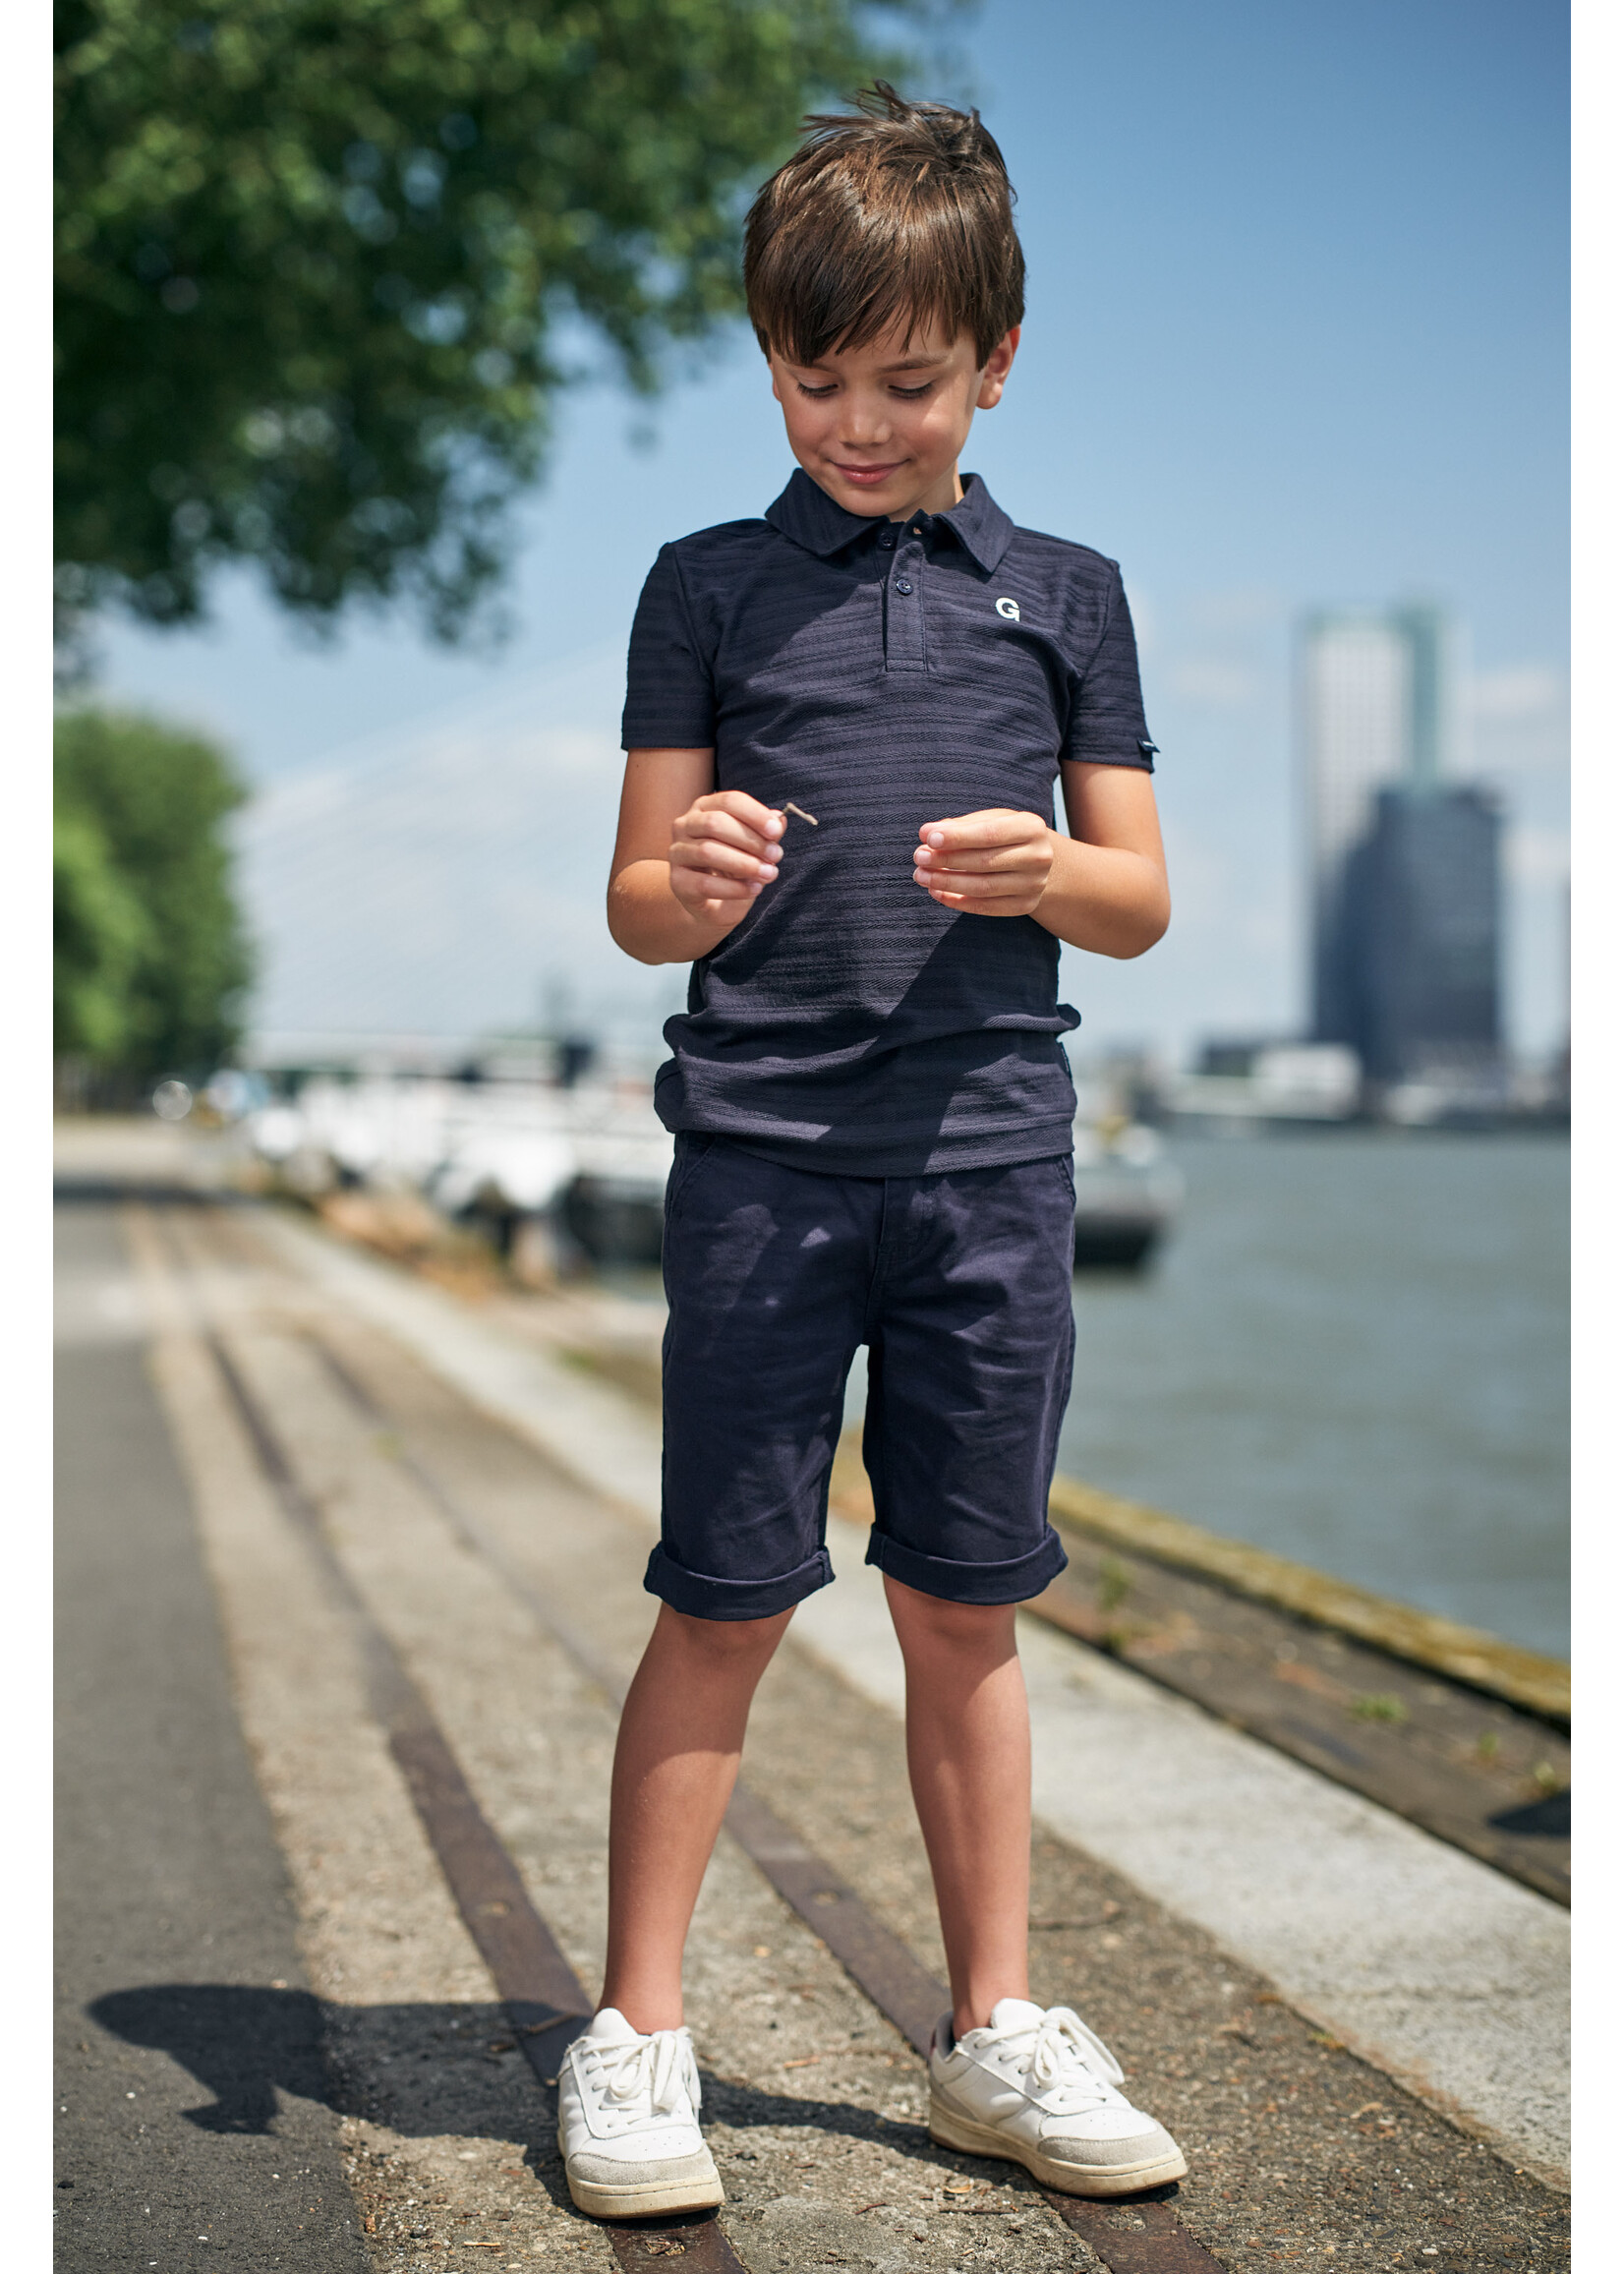 Le Chic Boys Kids L402-6414 NEILY classic  polo Navy